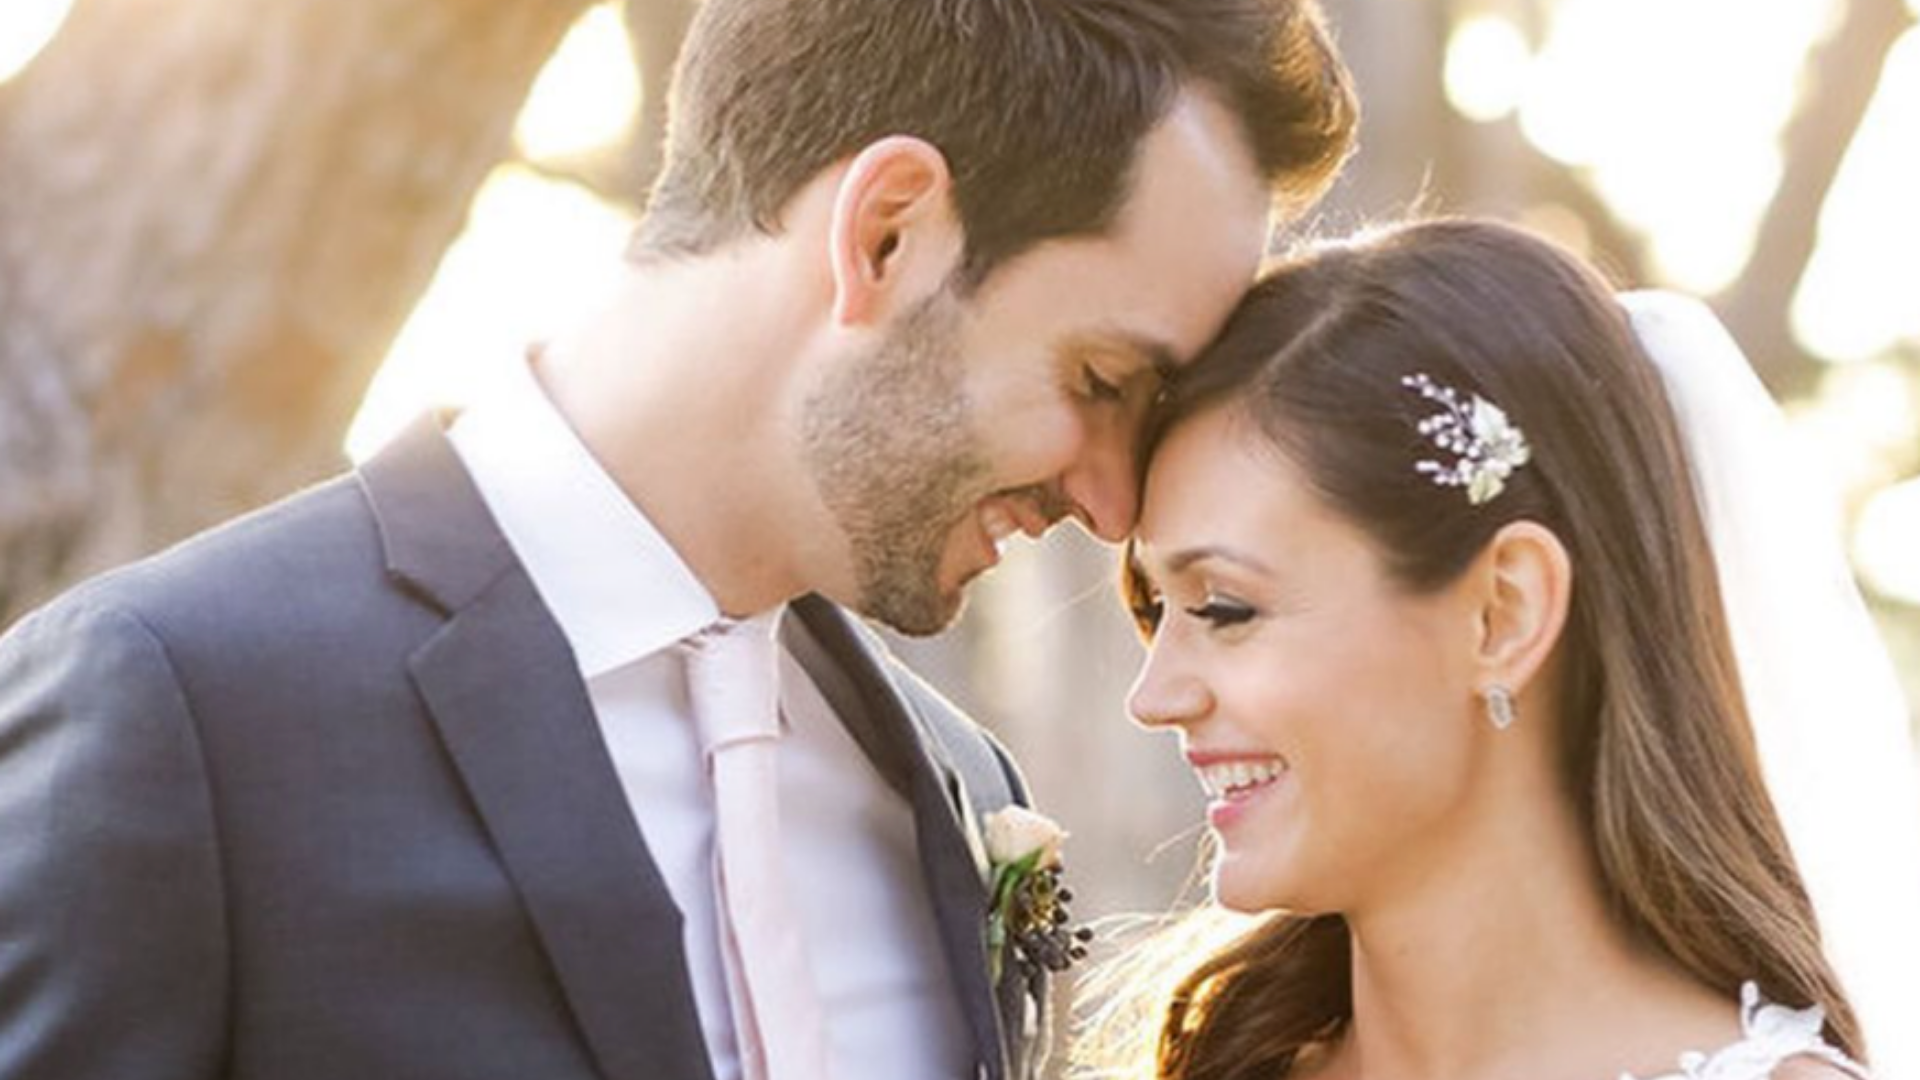 10 Steal-Worthy Moments from "Bachelorette" Desiree Hartsock's Big Day